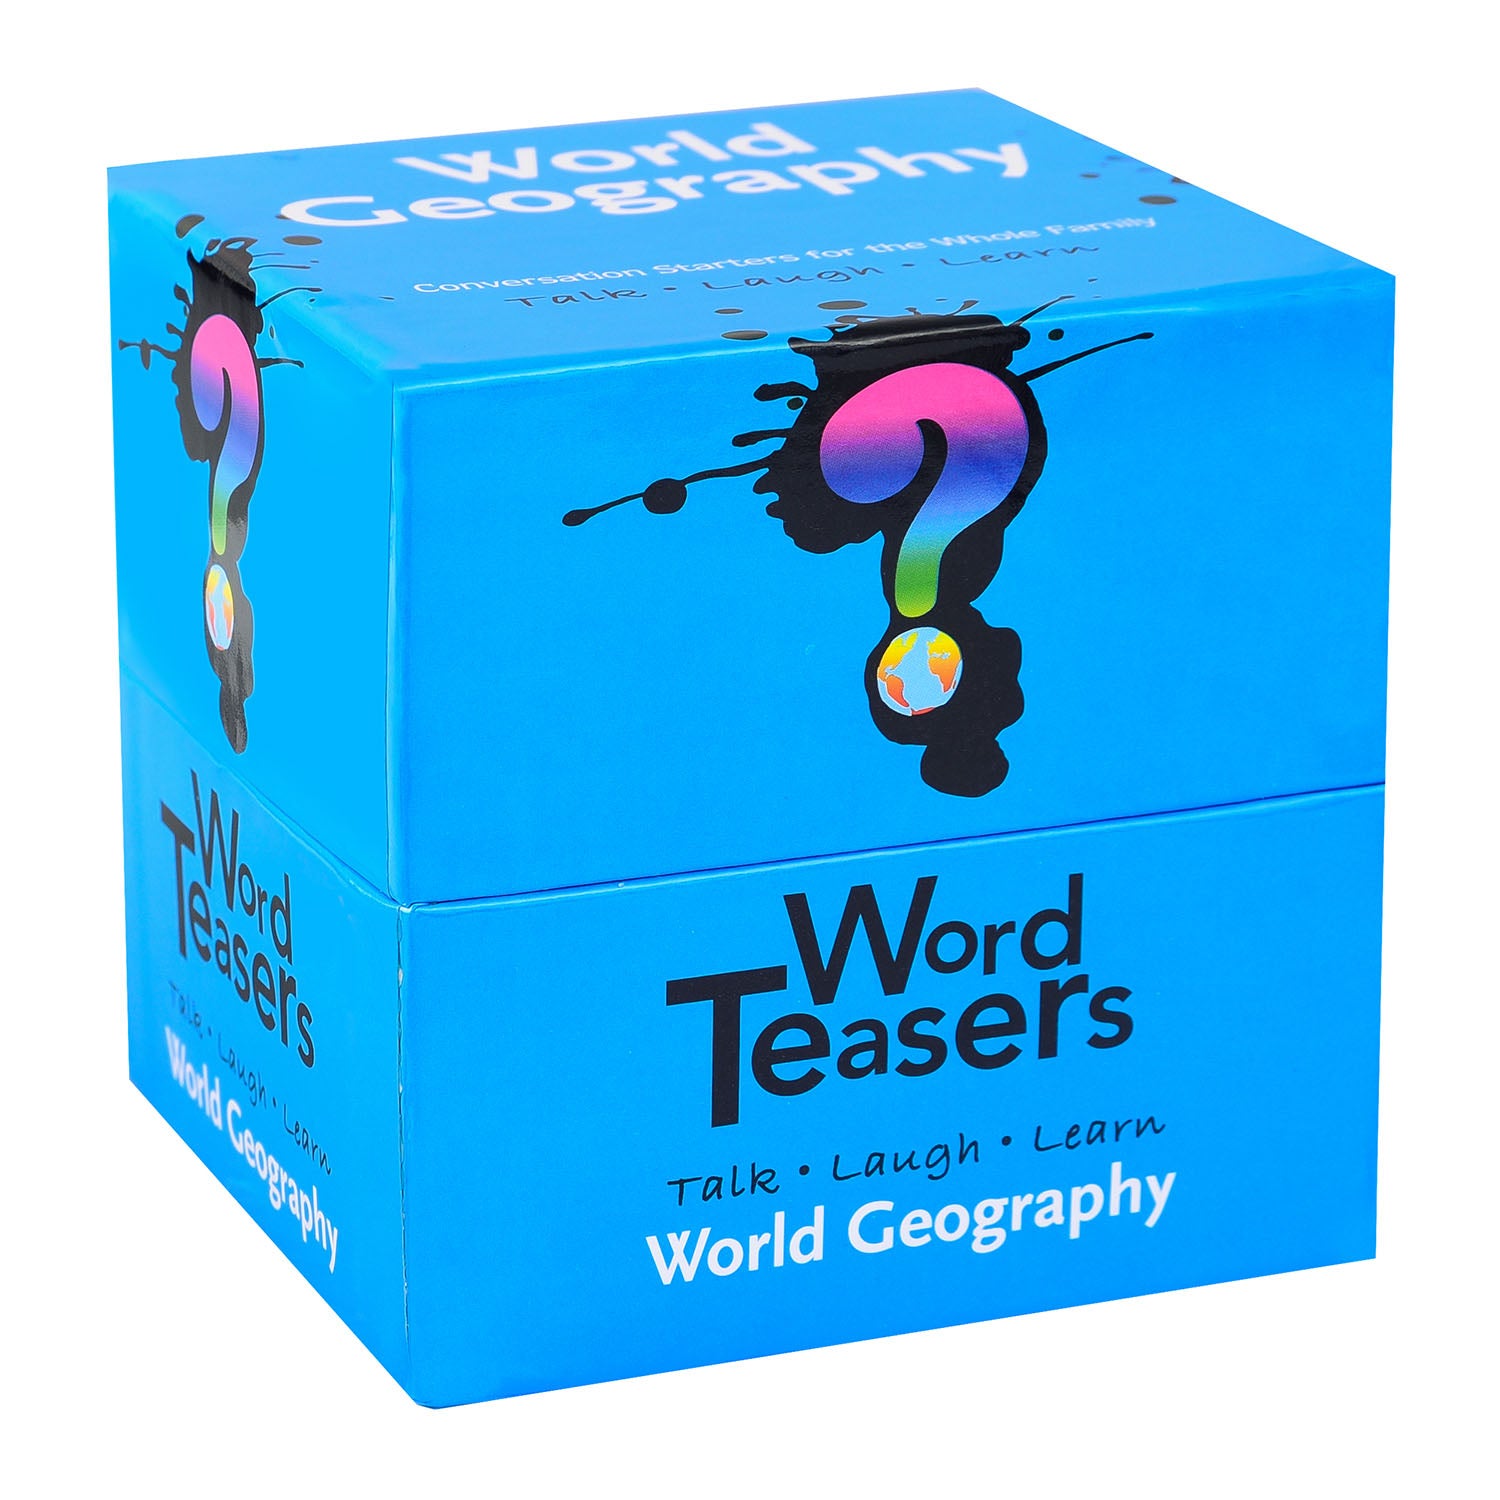 WordTeasers: World Geography